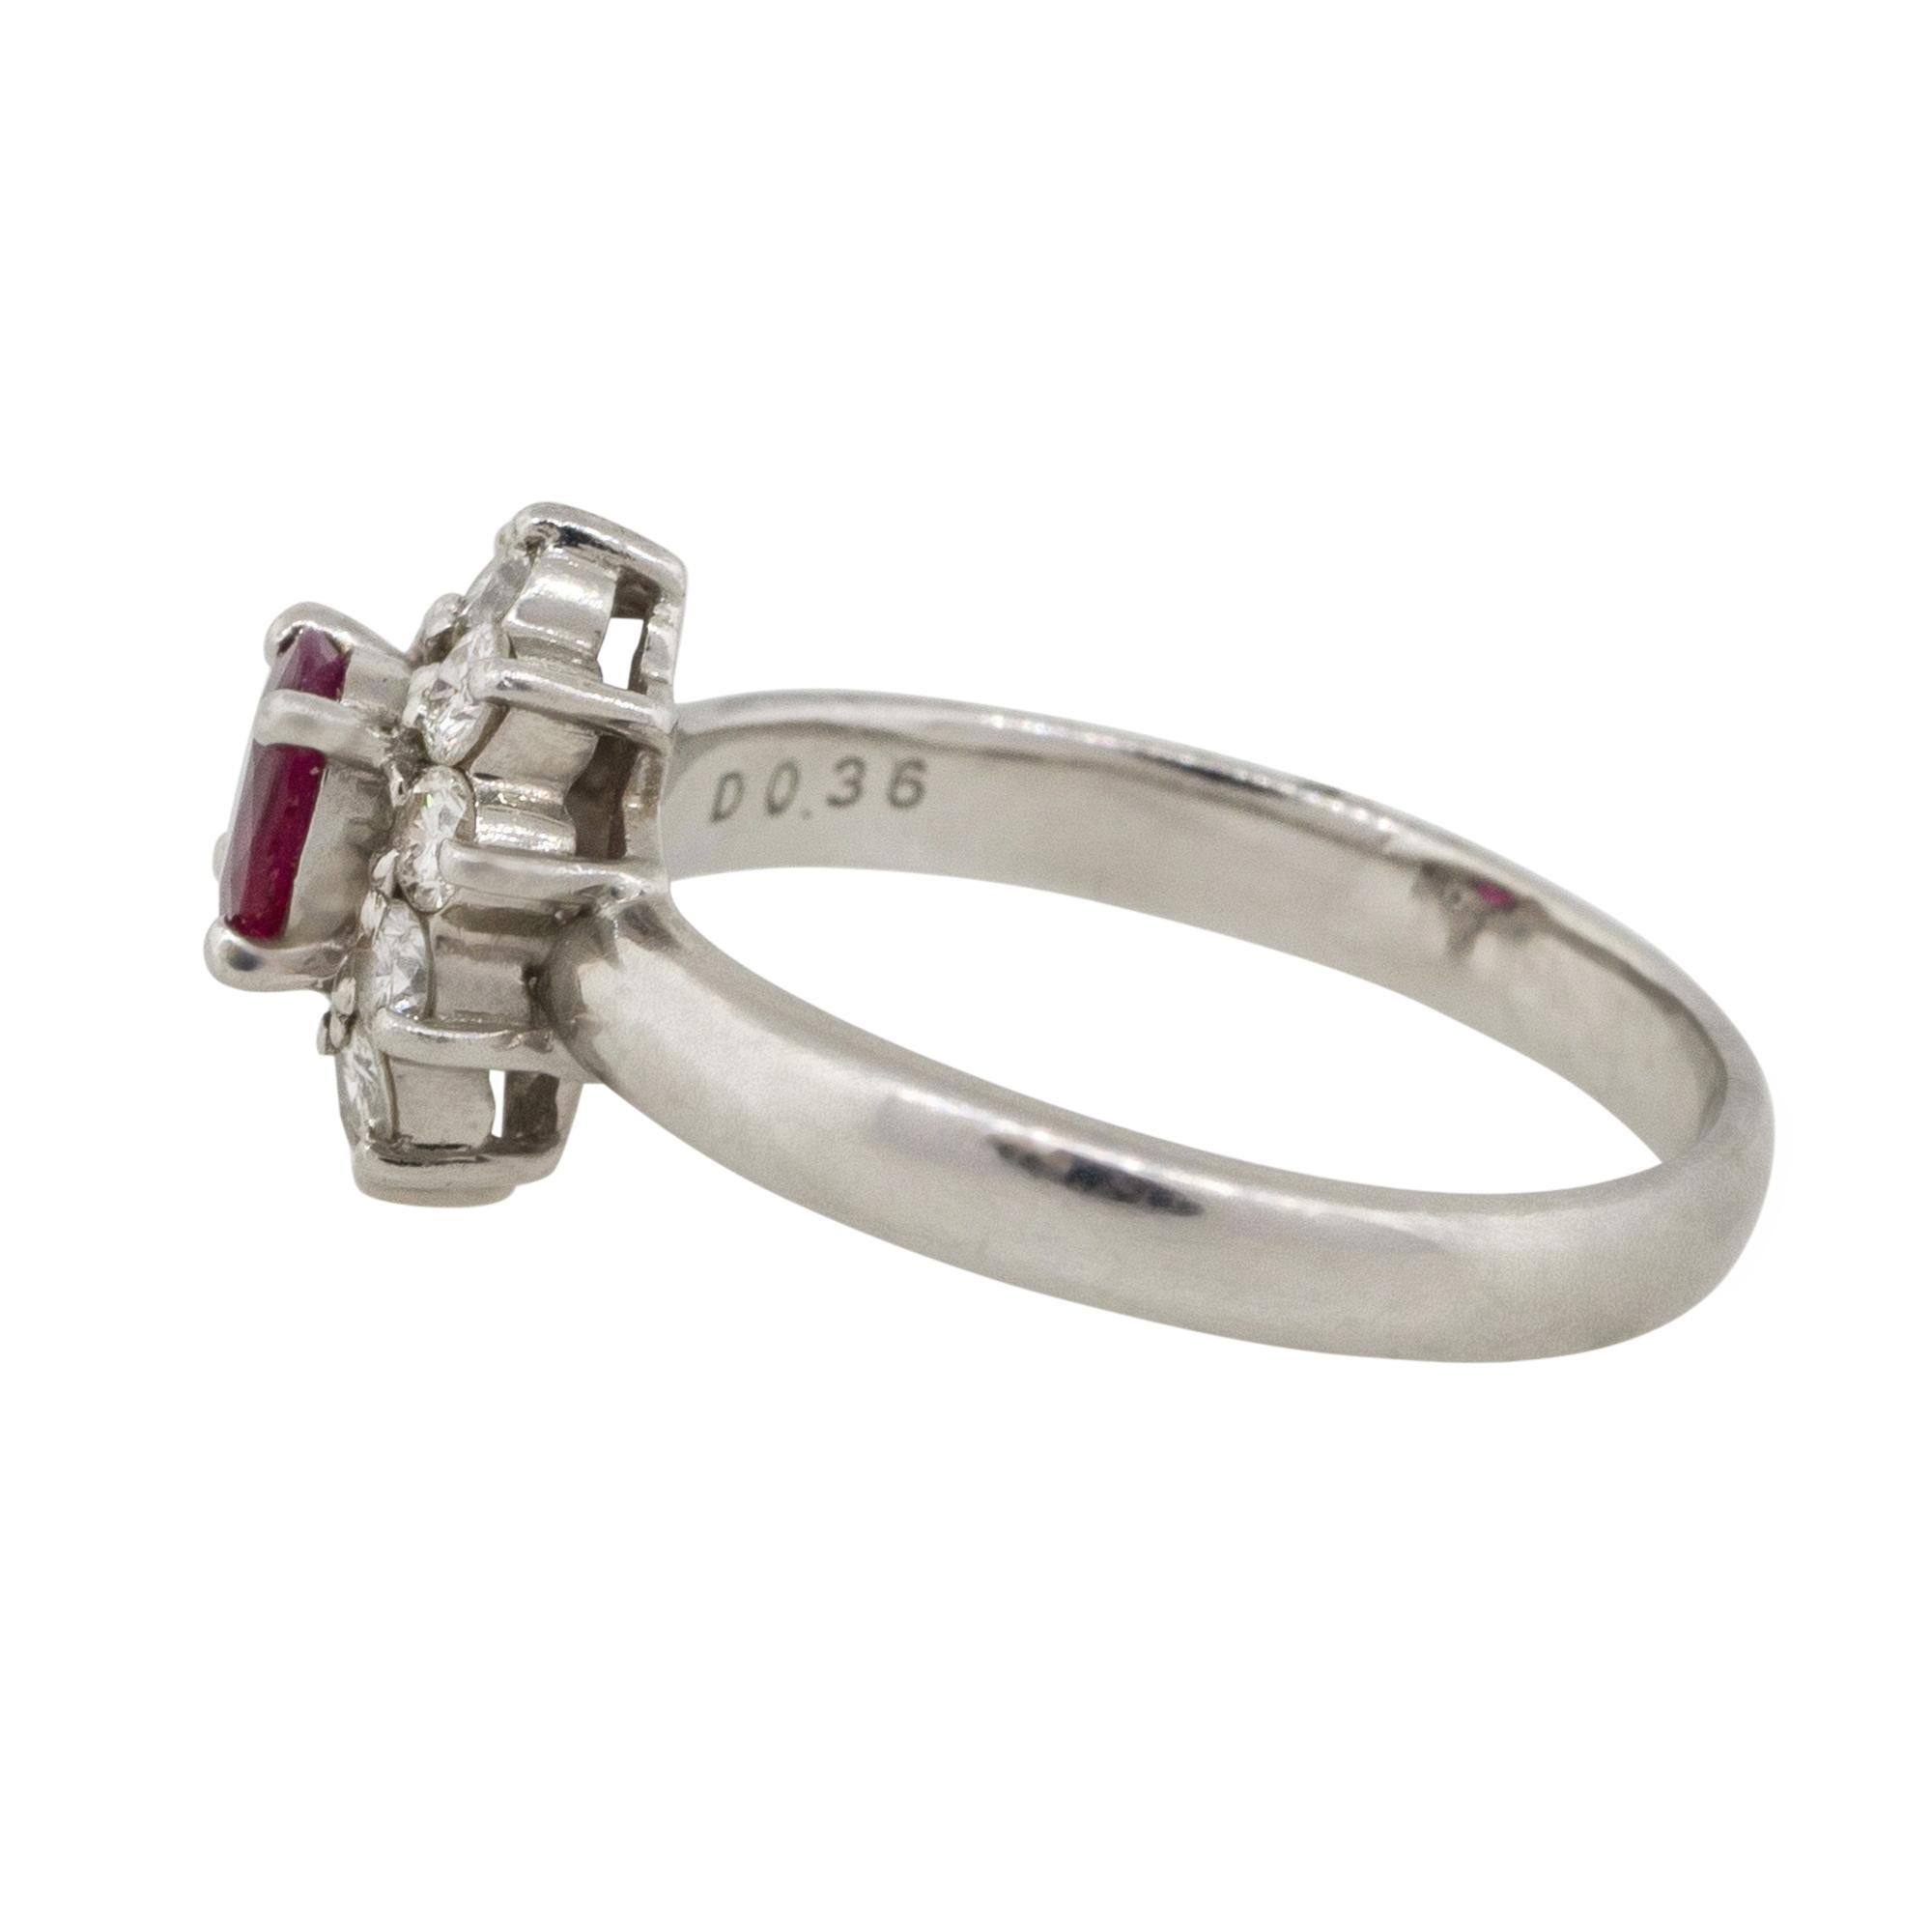 Oval Cut 0.38 Carat Oval Ruby Diamond Halo Flower Ring Platinum in Stock For Sale